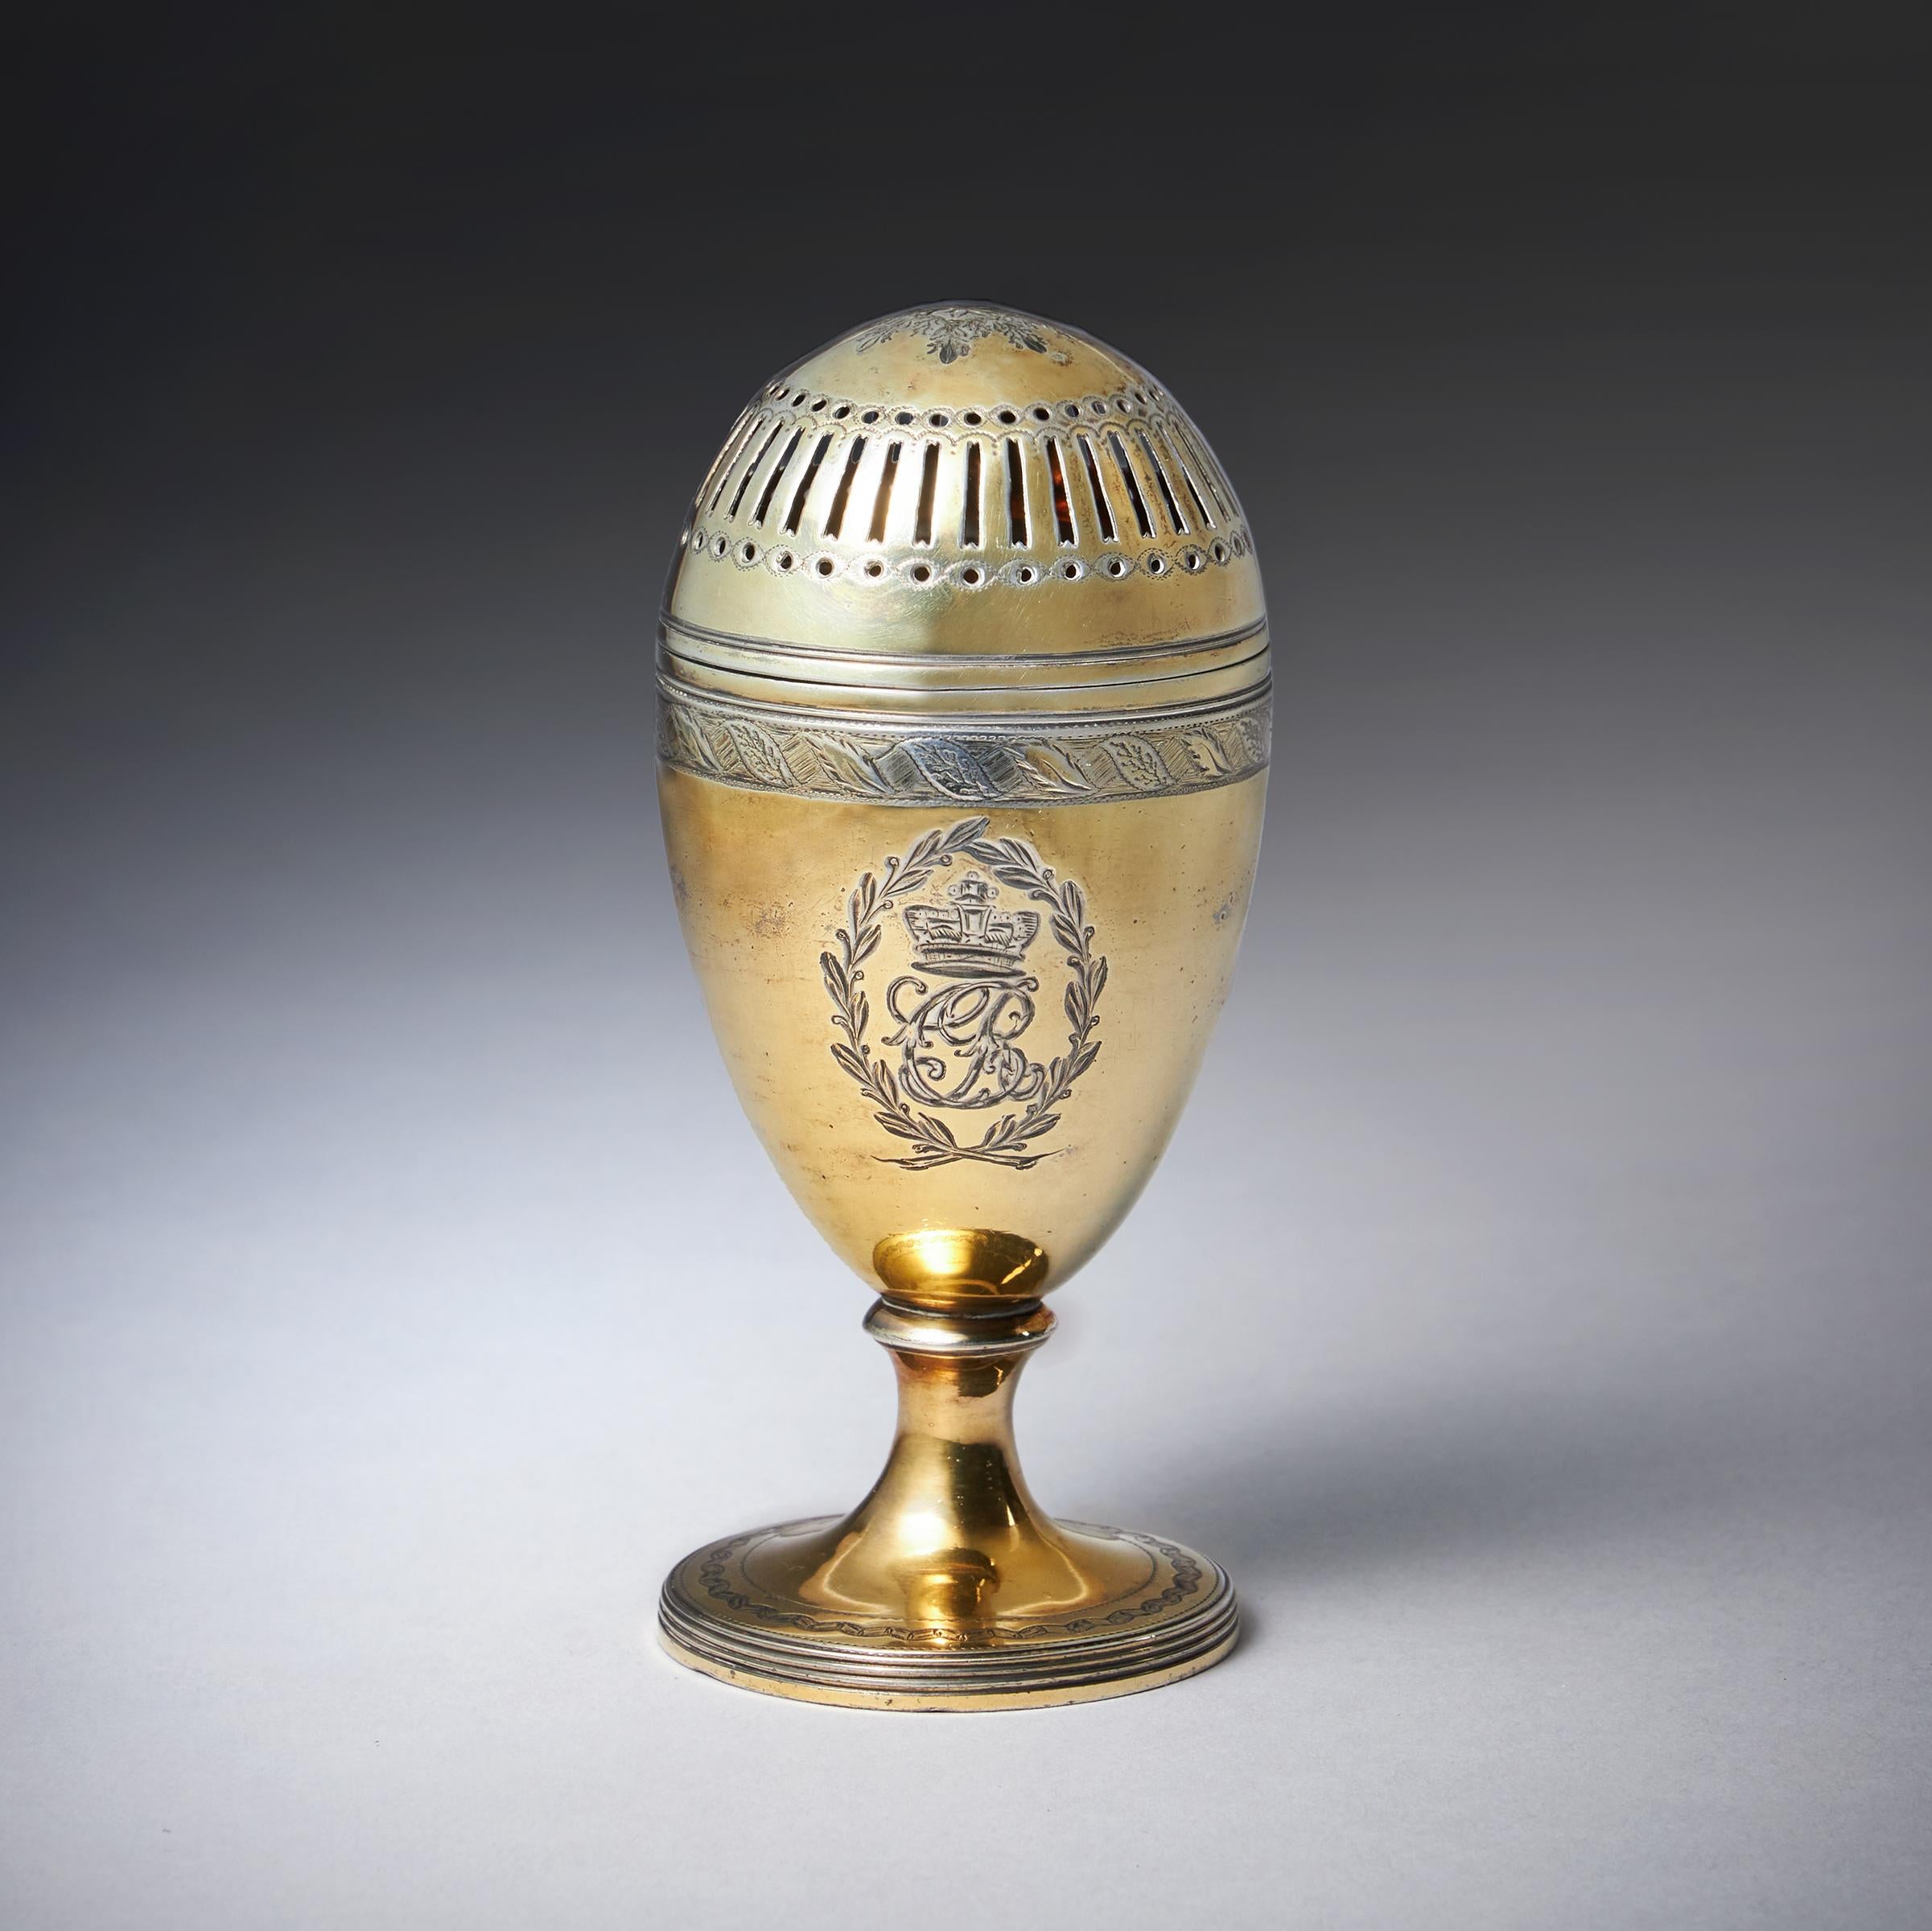 George III Silver-Gilt Pepper Pot with the Royal Cypher of Queen Charlotte 1798-1